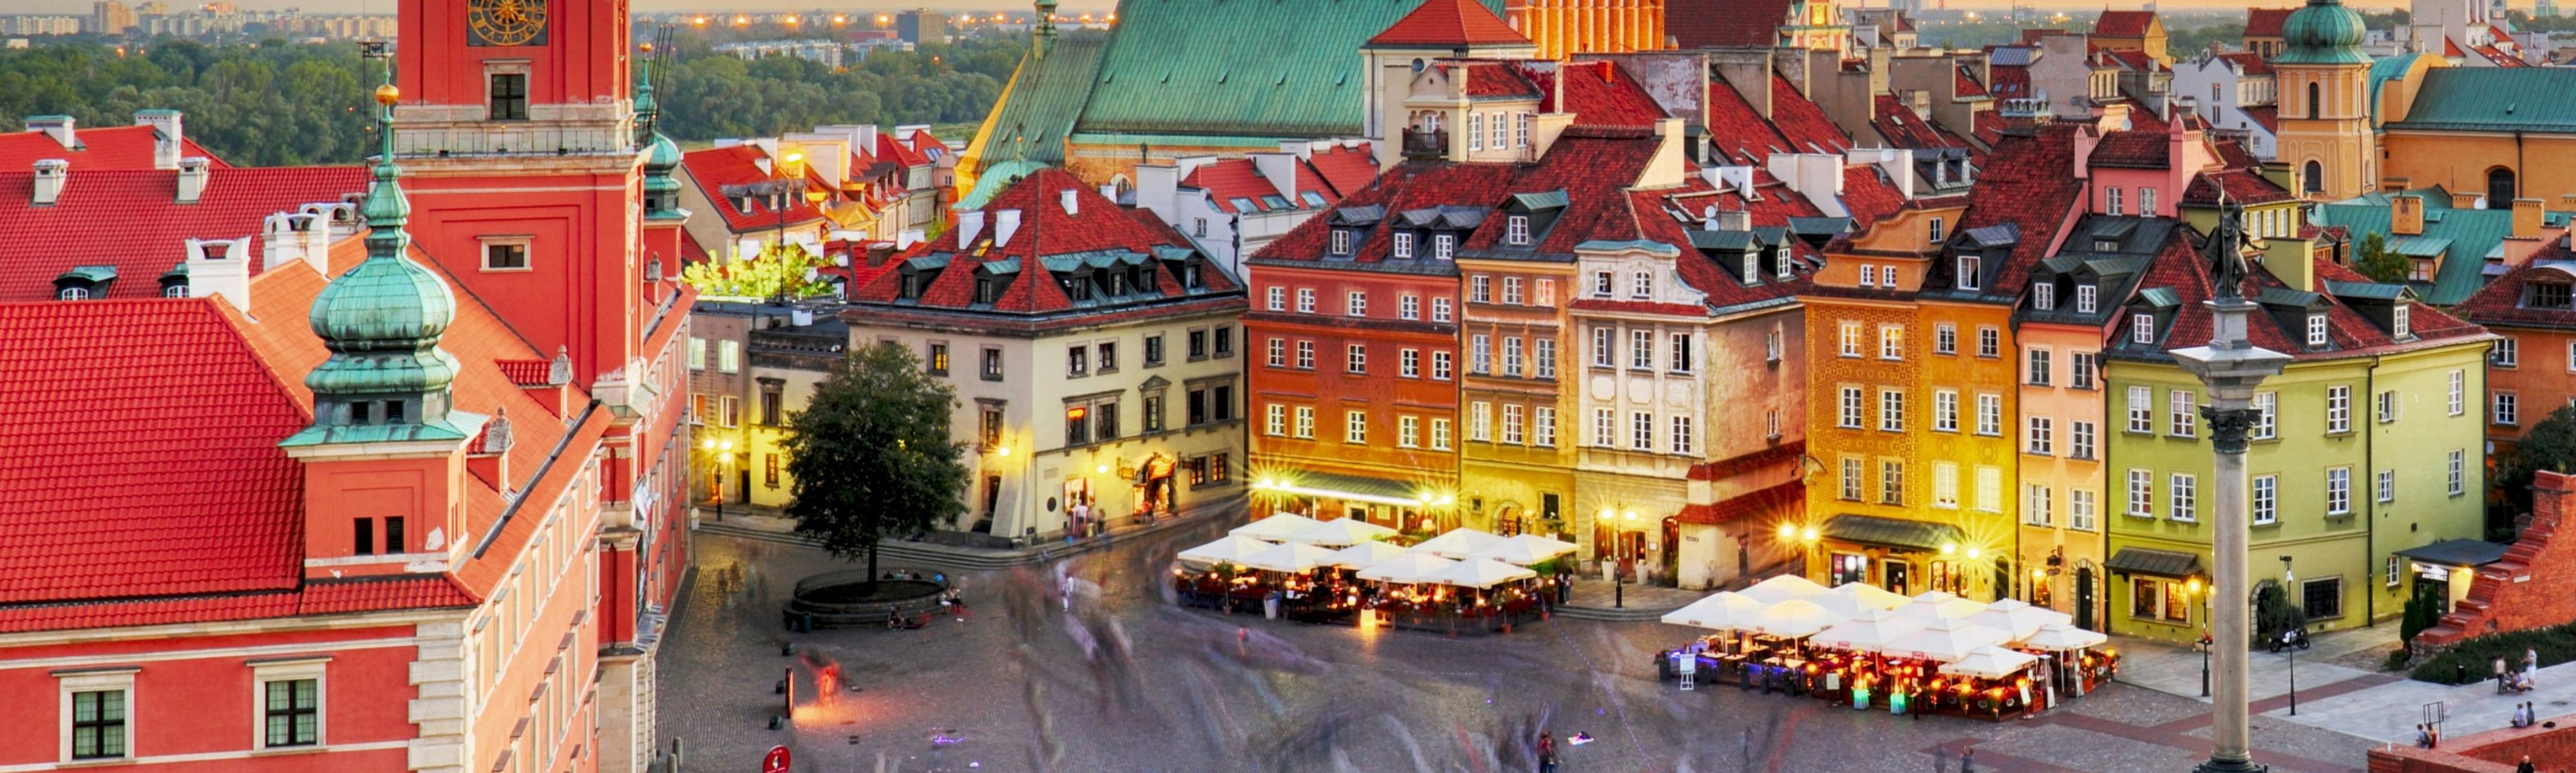 panorama of old town warsaw in poland at night